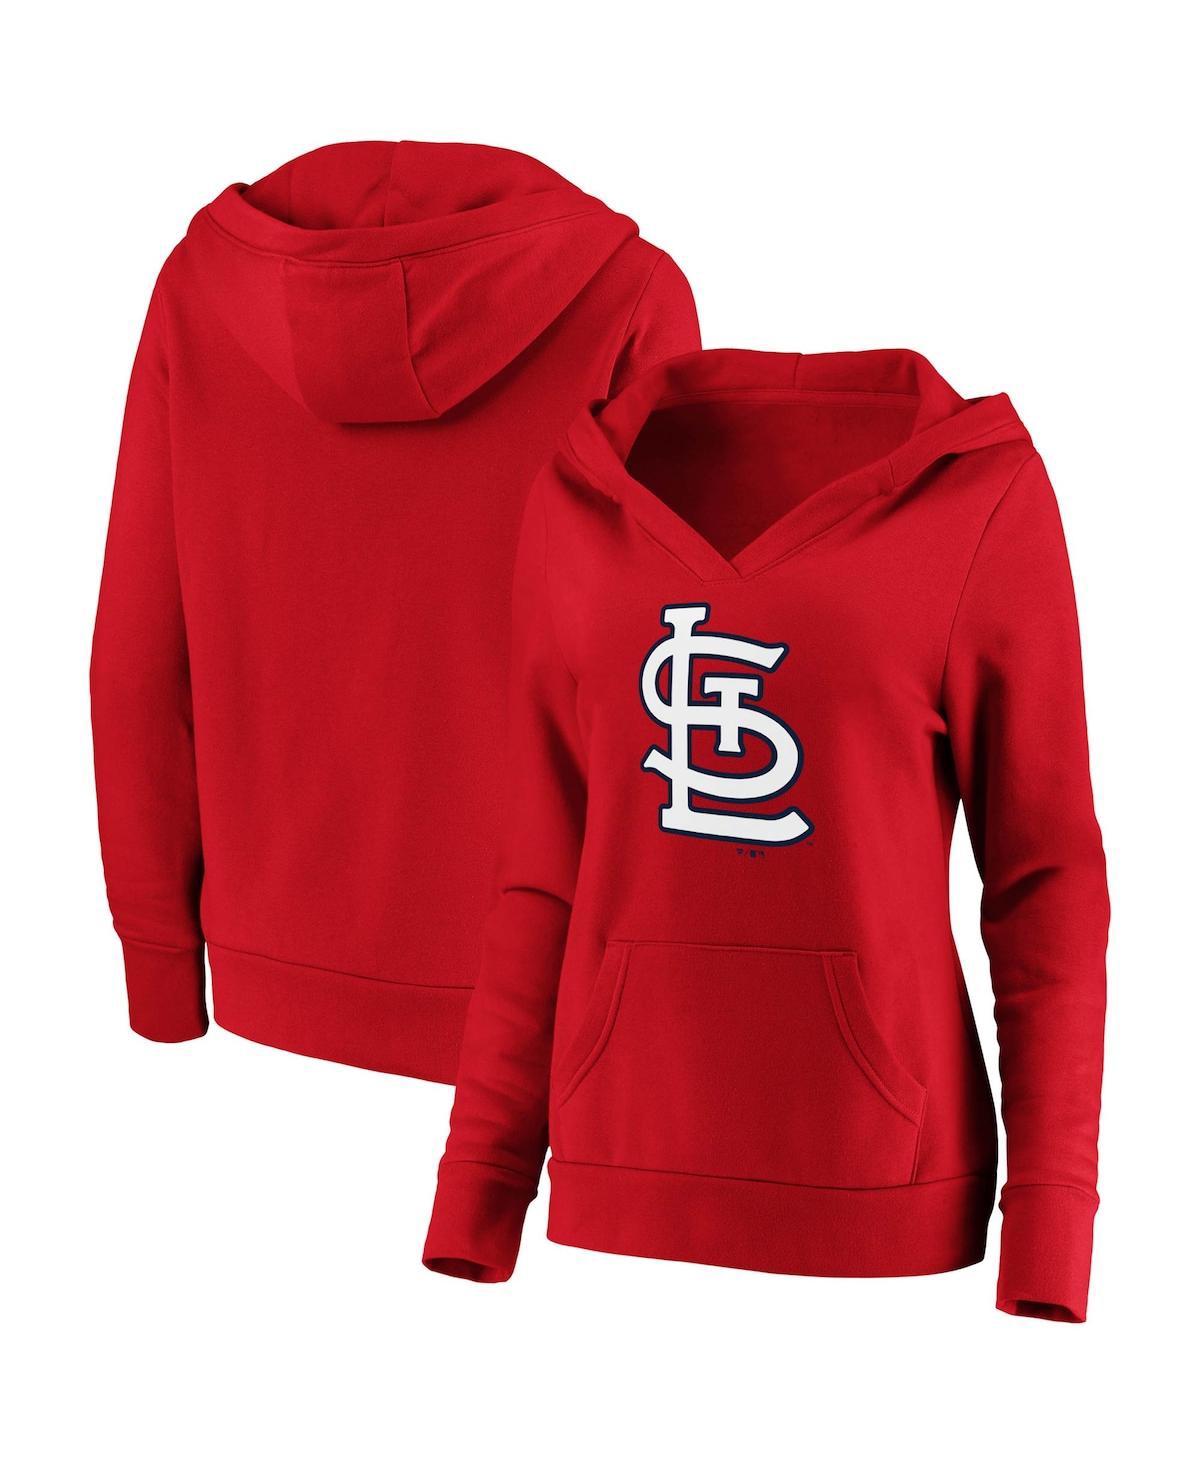 Women's Fanatics Red St. Louis Cardinals Official Logo Crossover V-Neck Pullover Hoodie - Red